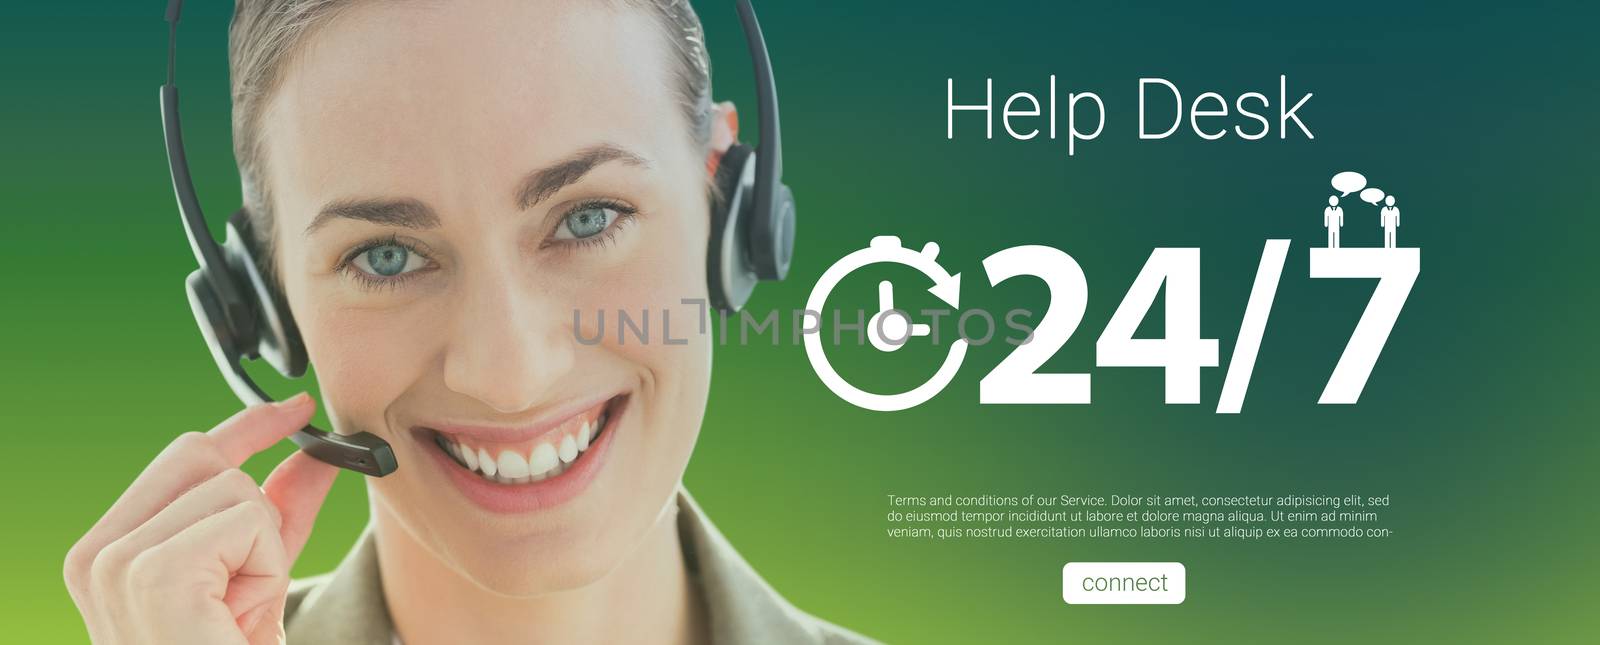 Smiling businesswoman with headset looking at camera  against green abstract background